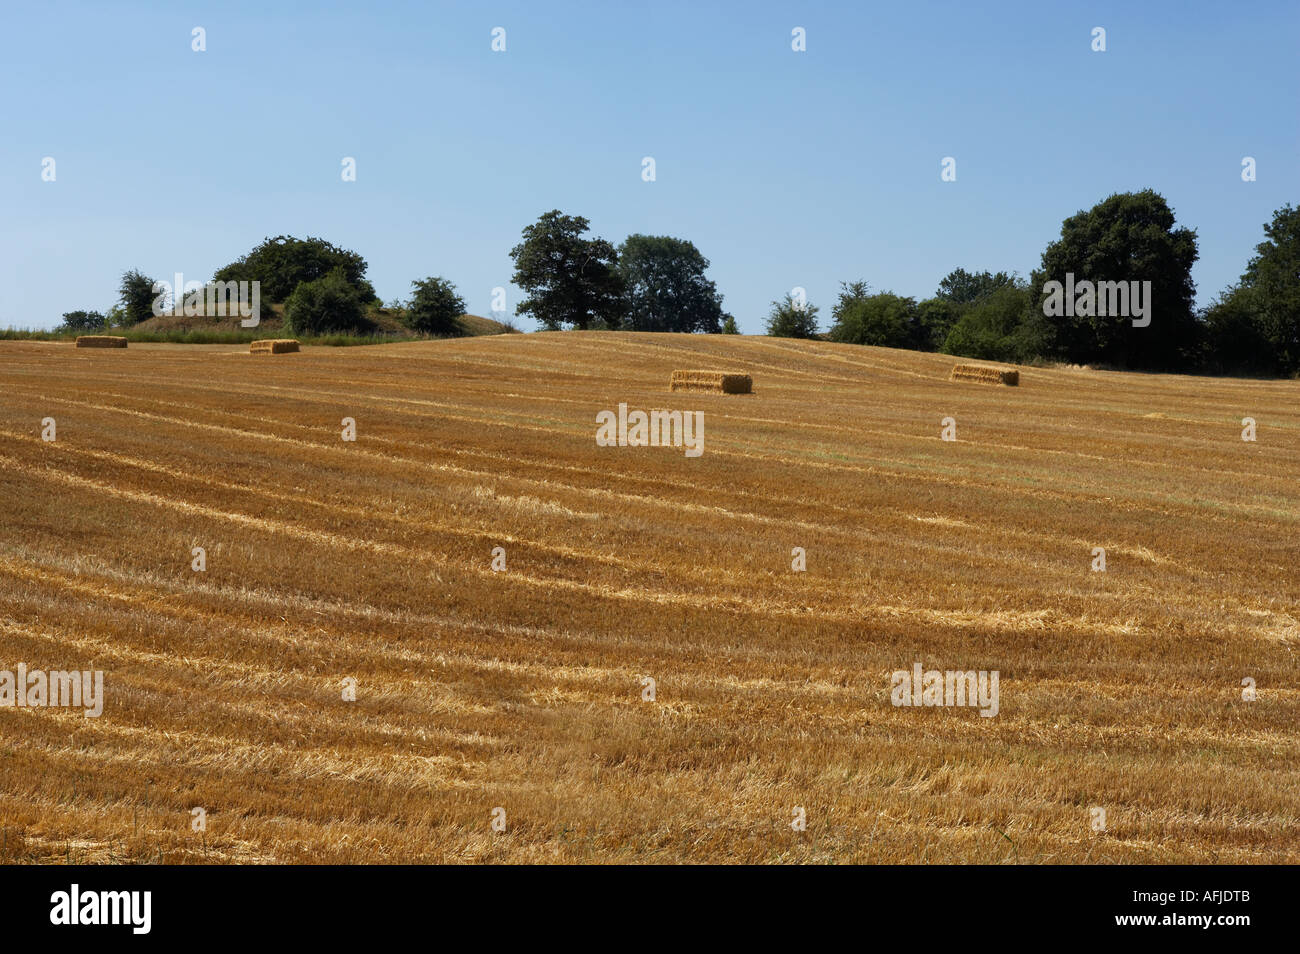 FIELD OF BARLEY STUBBLE WITH BAILS Stock Photo